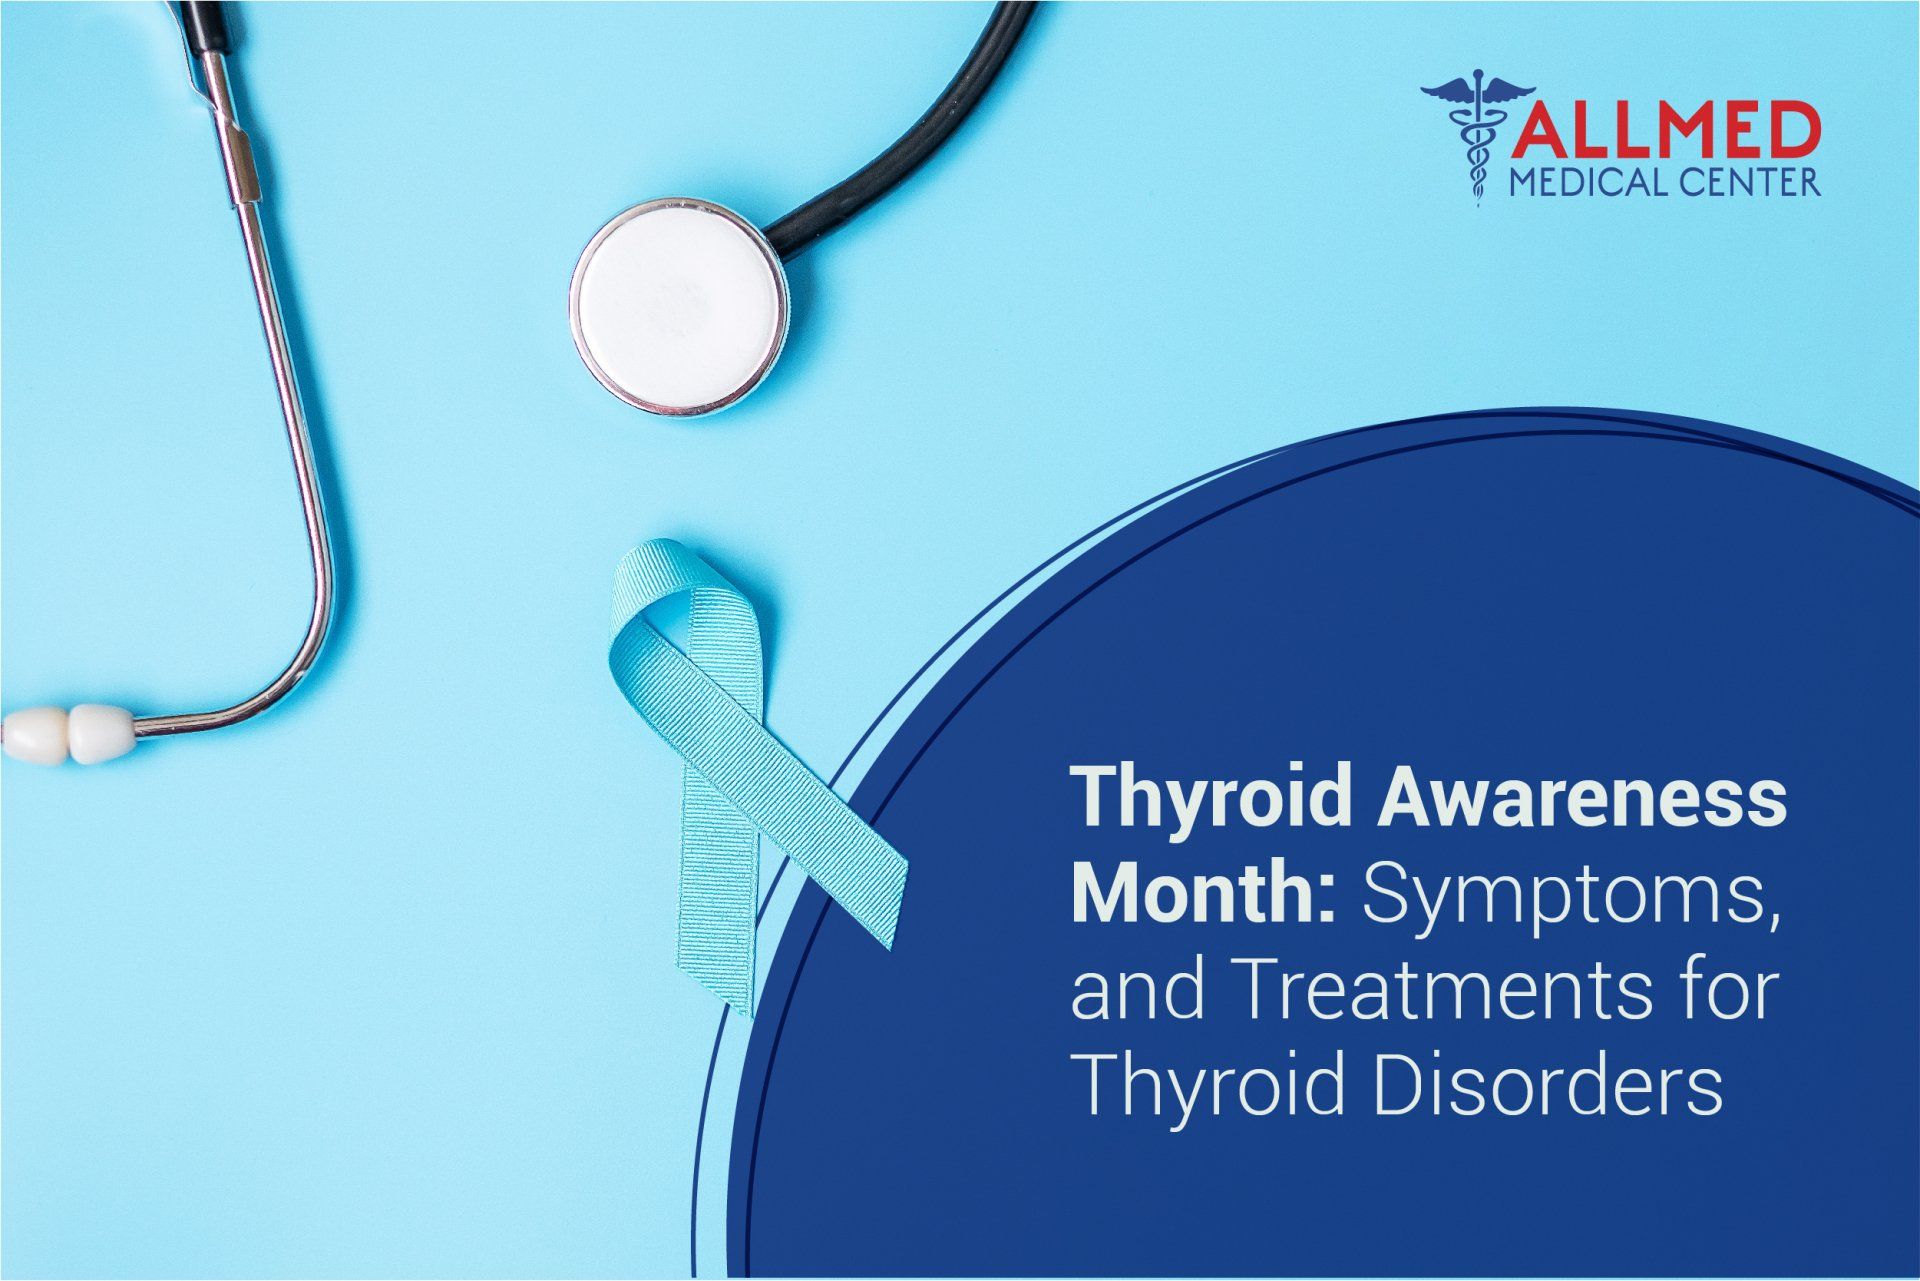 Thyroid Awareness Month: Symptoms and Treatments for Thyroid Disorders